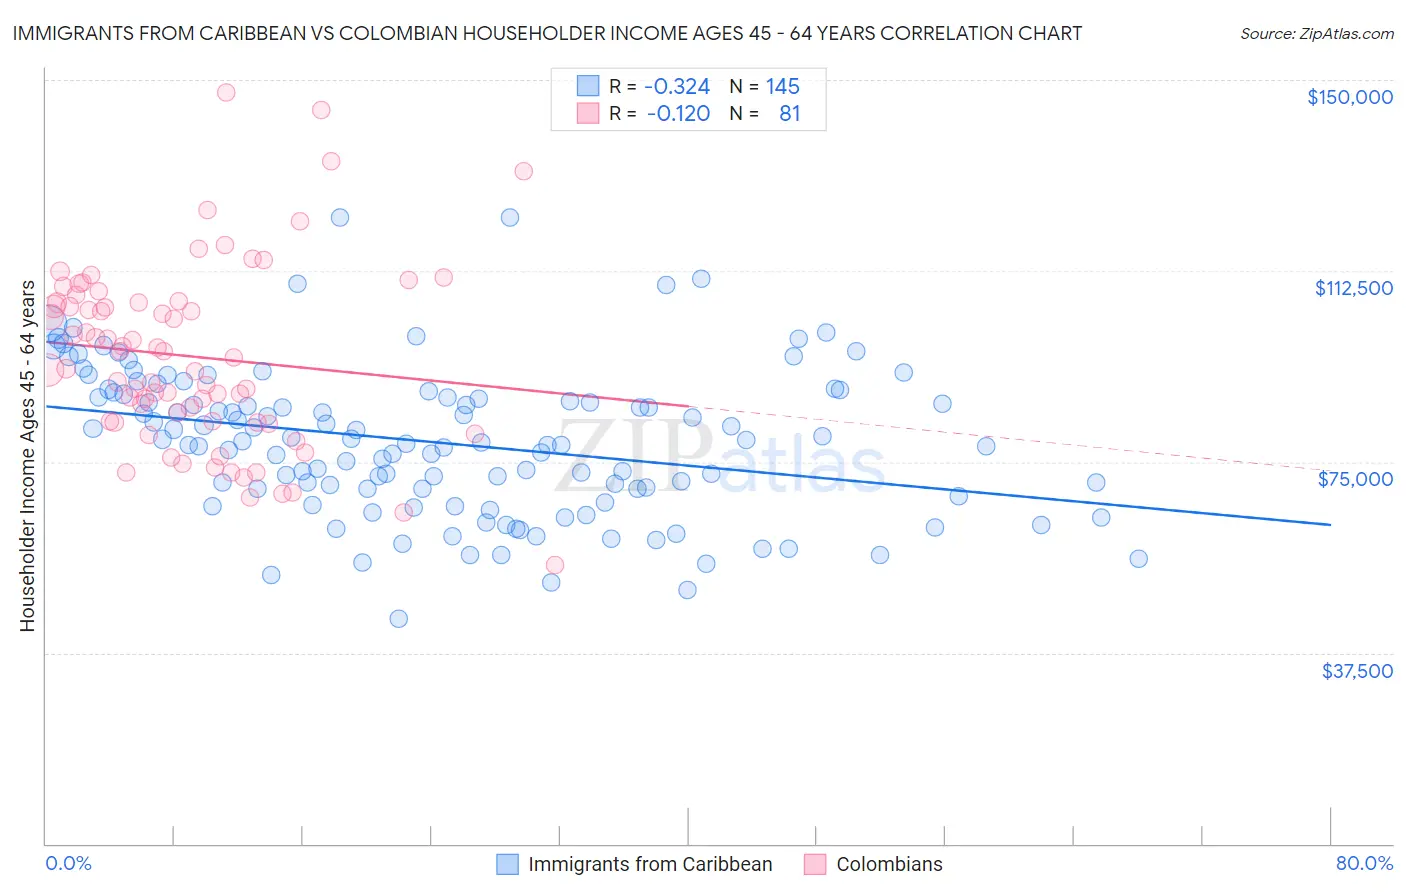 Immigrants from Caribbean vs Colombian Householder Income Ages 45 - 64 years